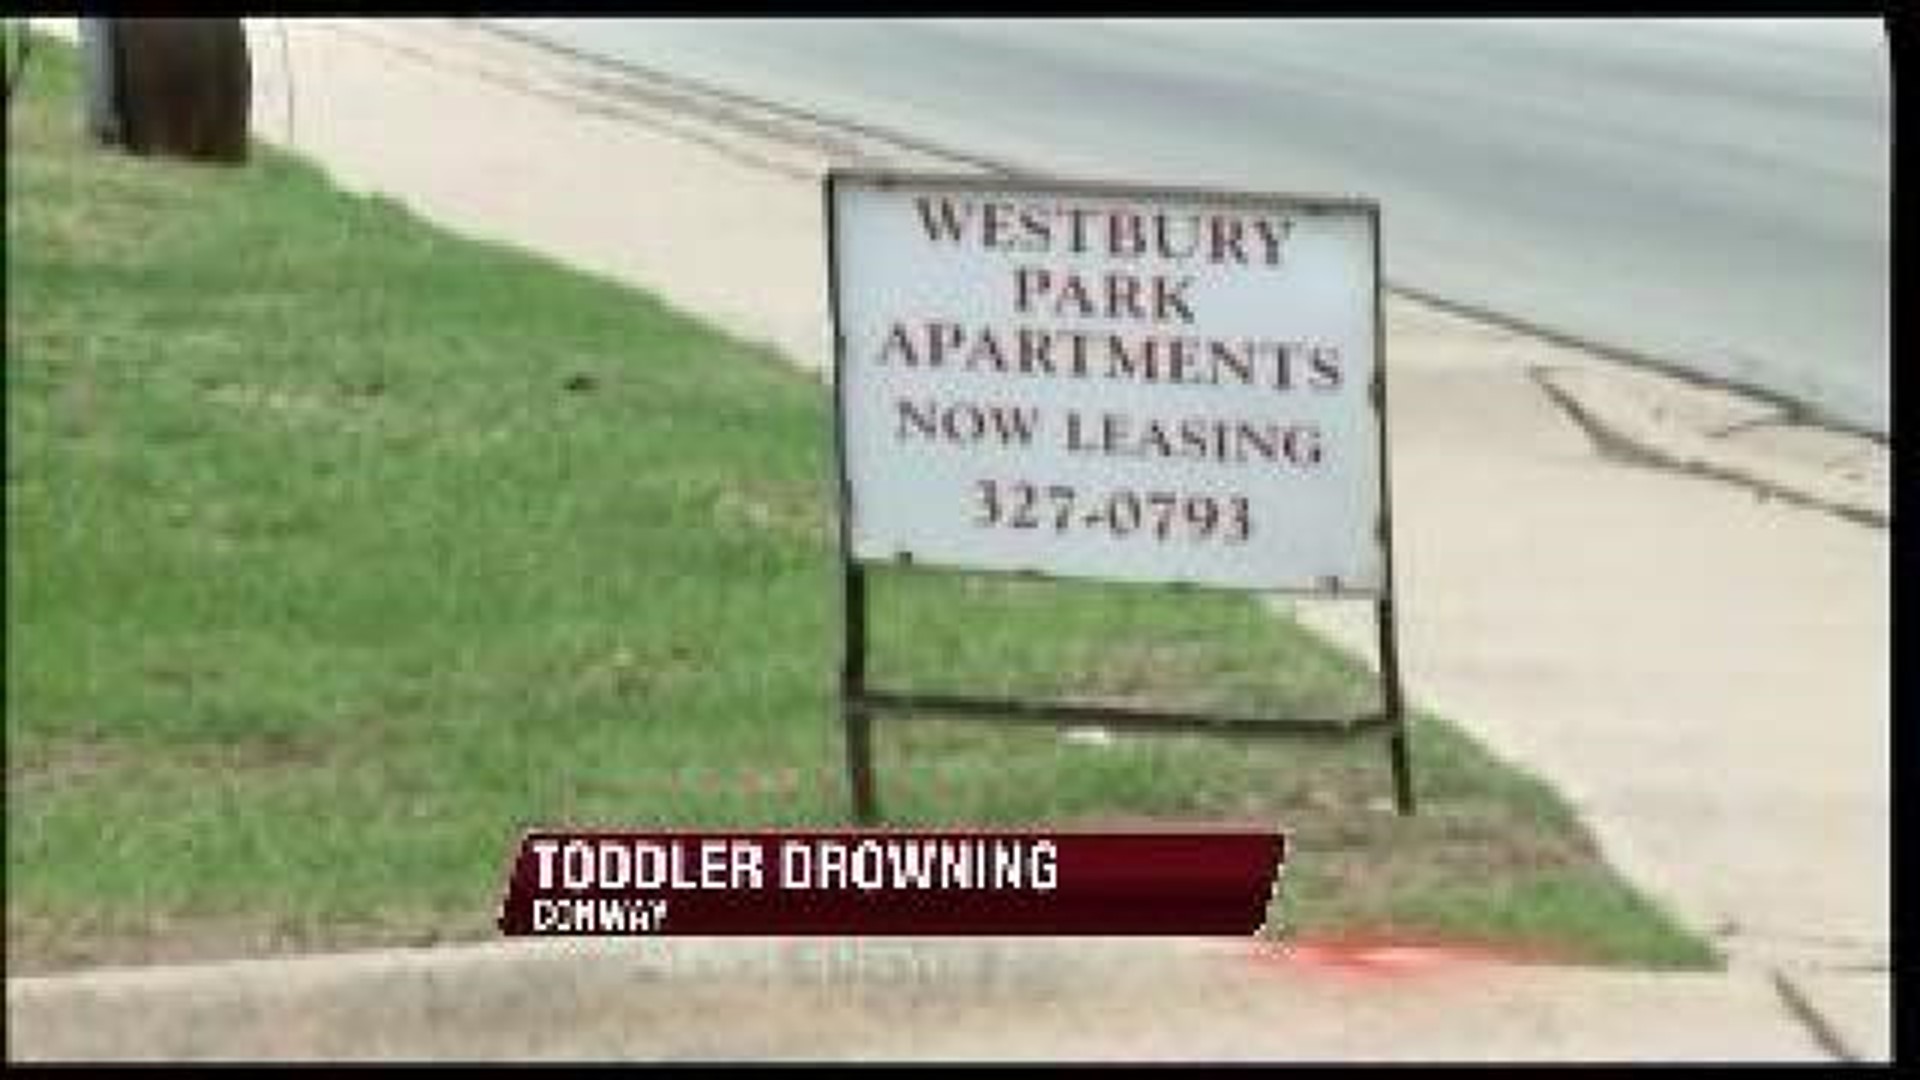 A toddler drowned at an Conway apartment complex